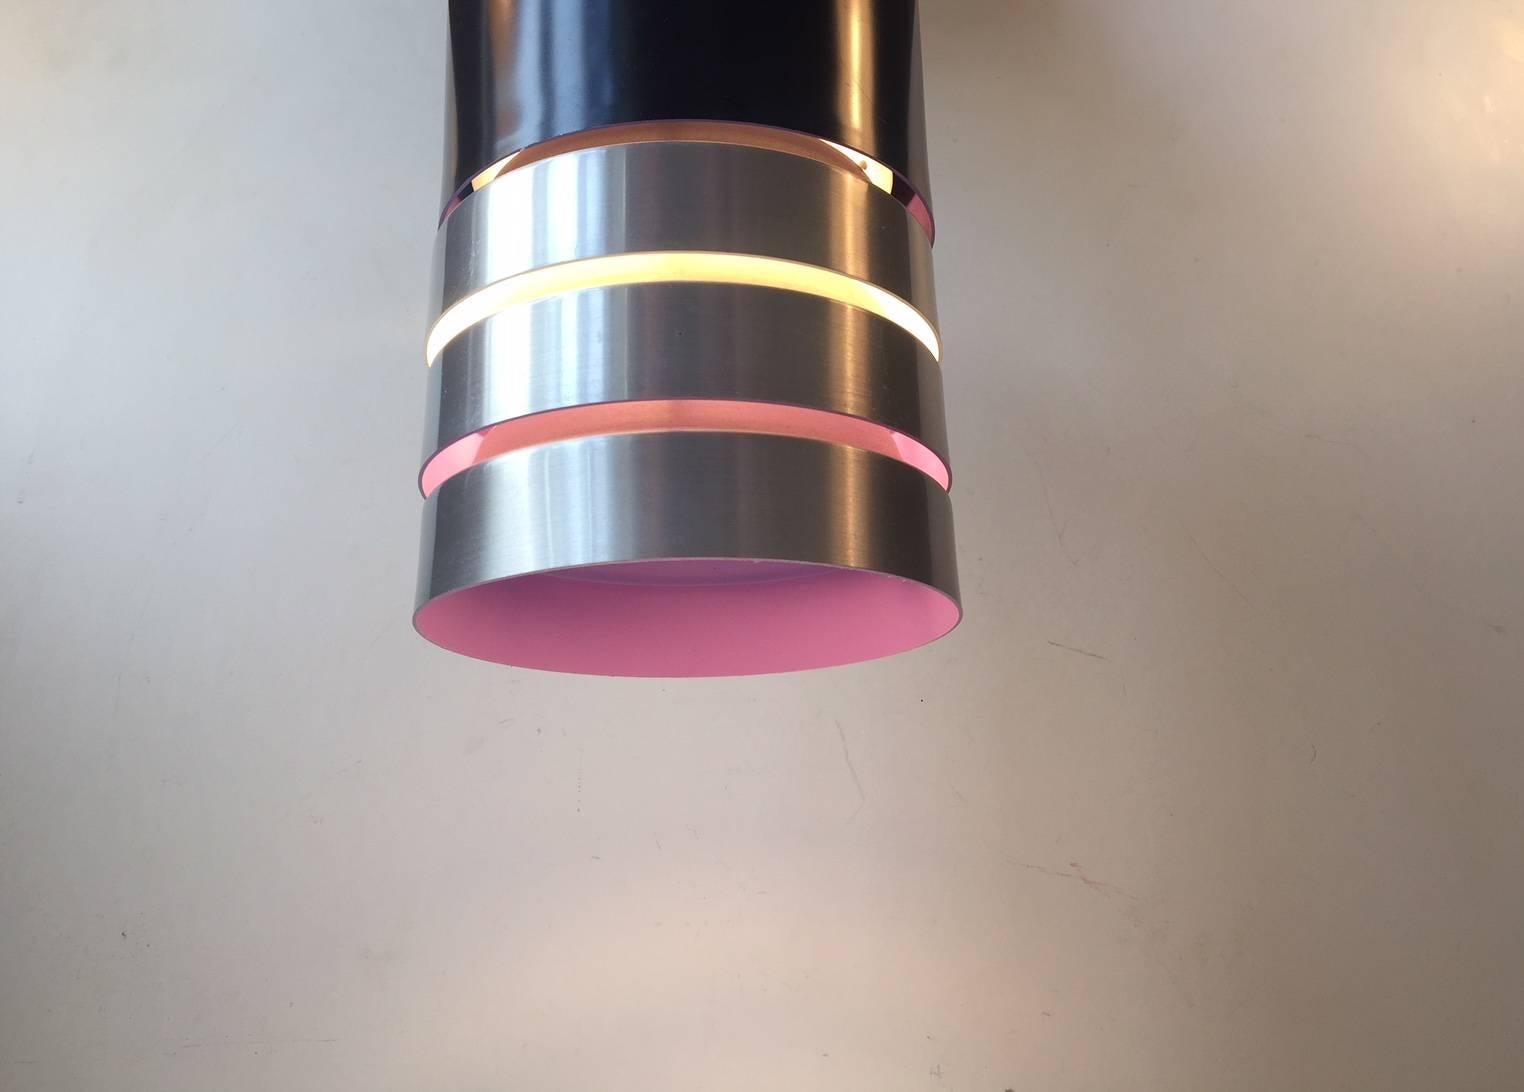 - Aluminium pendant lamp by Carl Thore
- Manufactured by Granhaga Metalindustri, Sweden in the 1960s-1970s
- White and purple inner shades that create a warm atmospheric light
- Mounted with 3 meters new white wire
- Ready for mounting.